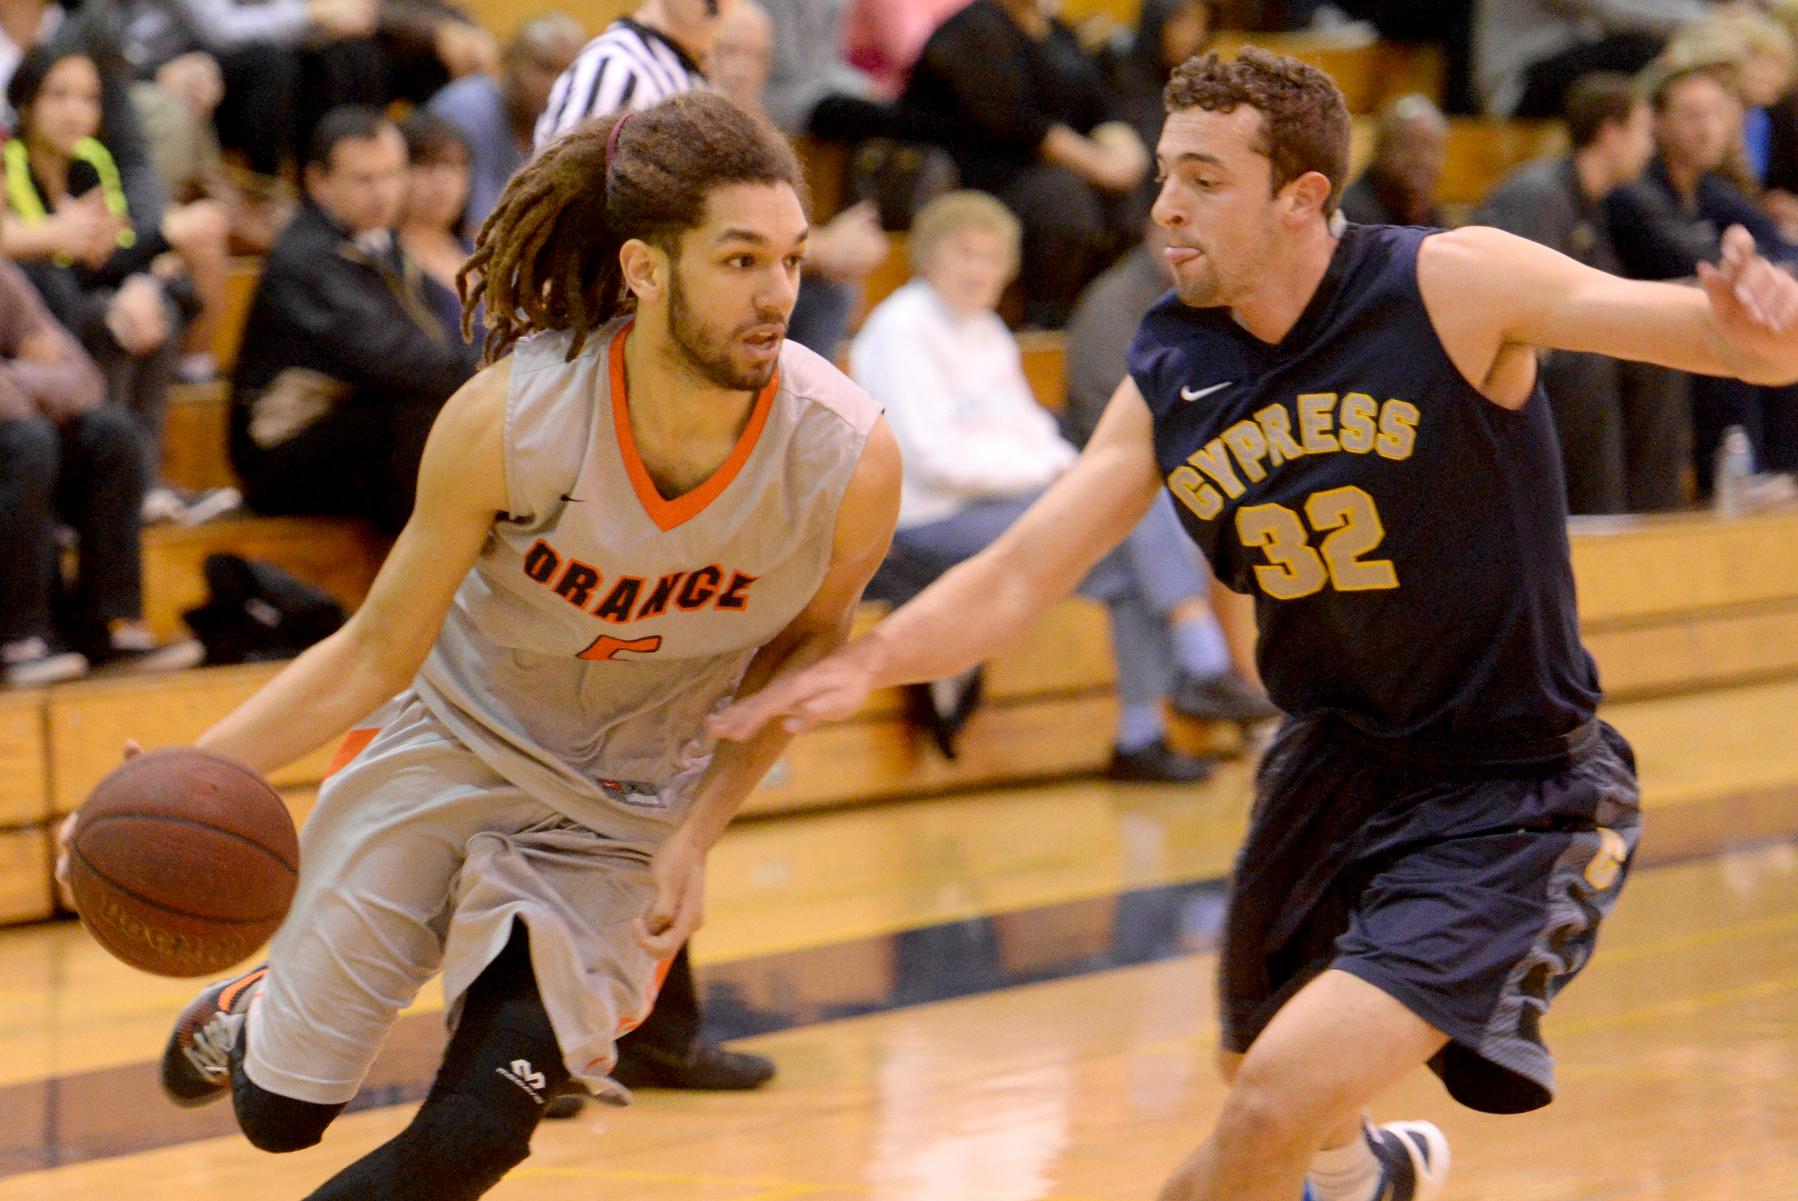 Pirates hang on for 64-55 win over Dons